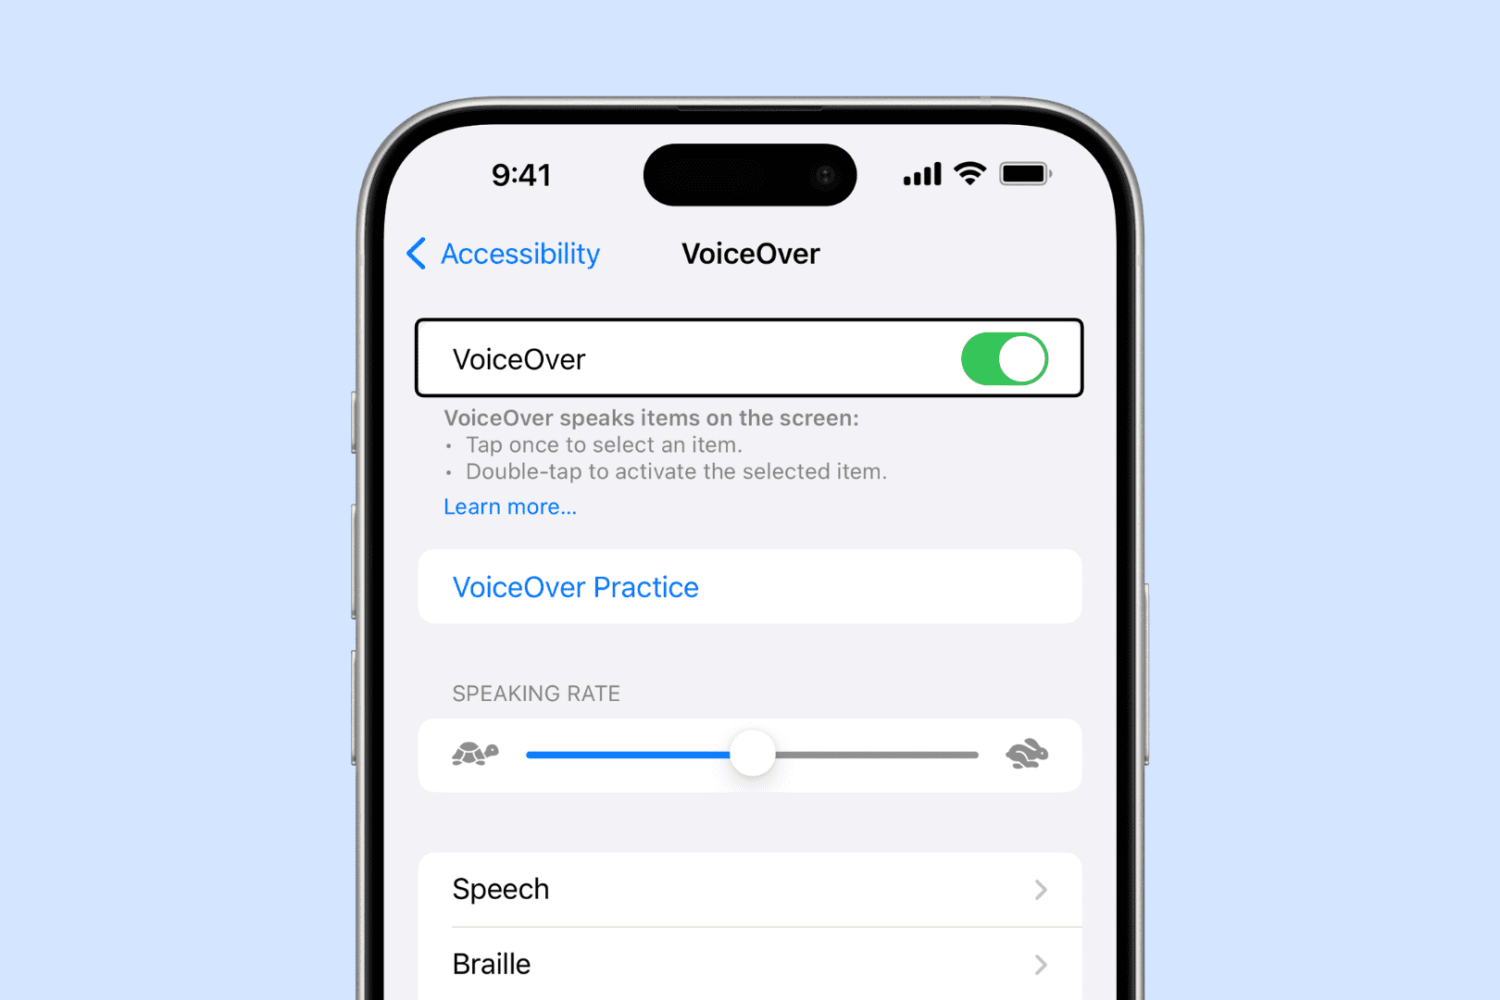 VoiceOver enabled on iPhone